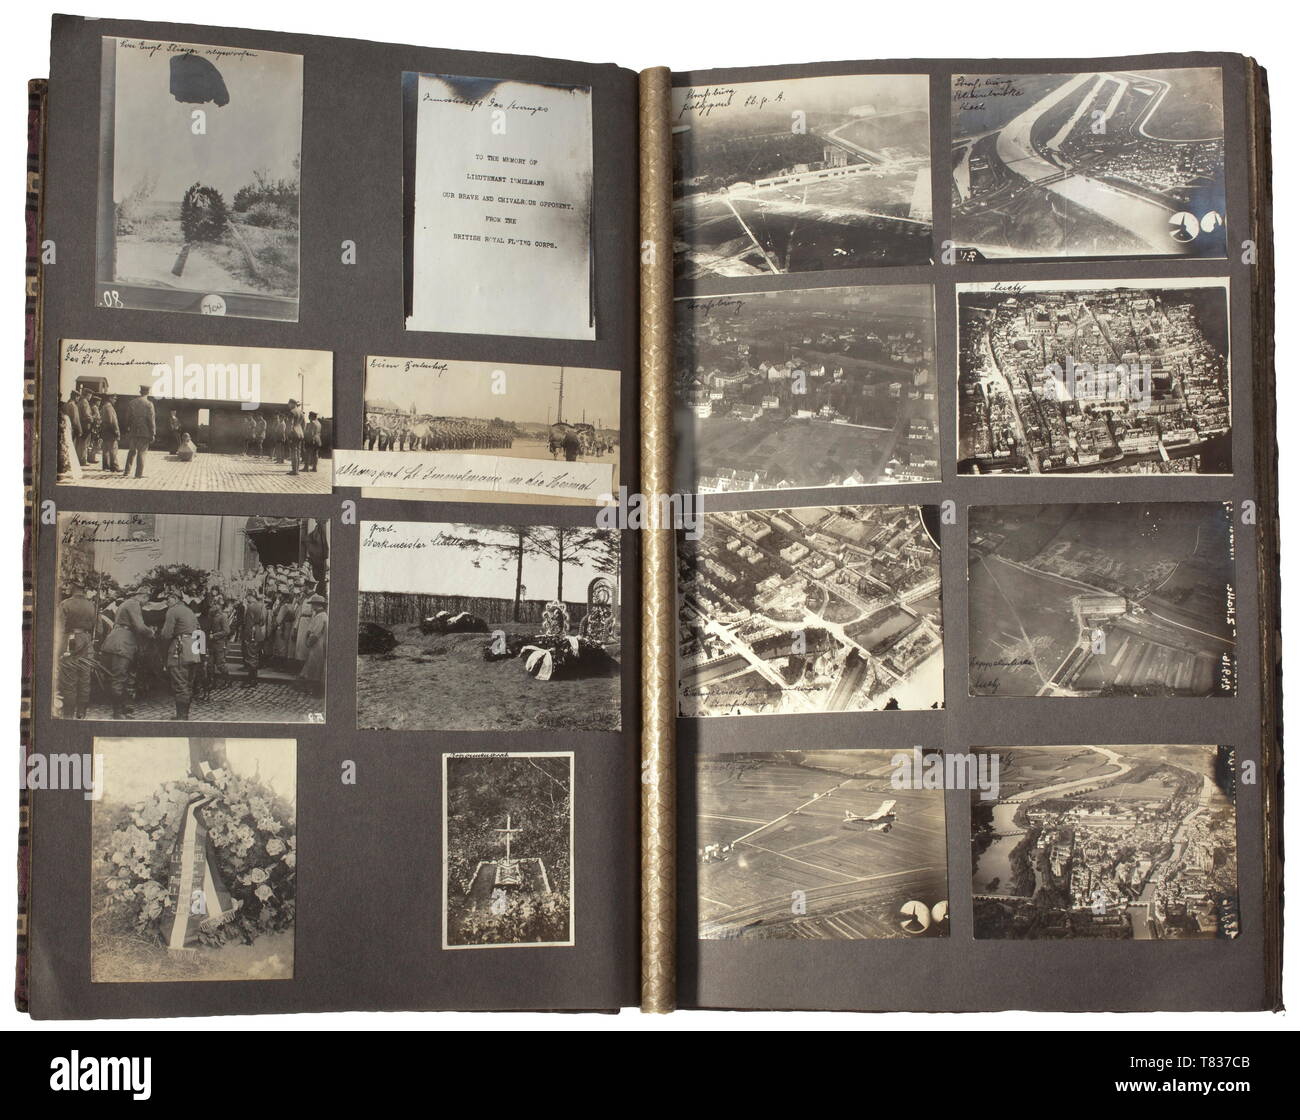 A photo album of Army Air Park 18 Inscribed album (30 x 42 x 3 cm) with ca. 235 high-quality images of the German flying corps during the First World War. Triplanes, biplanes and monoplanes of many types (Junkers, Pfalz, Fokker, Albatros, Rumpler etc.). Aerial views of military facilities, aircraft and towns (Paris, Reims, Abbeville, Troussures, St. Antoine, Beauvais, Clermont and many more). Images of groups wearing awards, trench views, airplanes with special painting, markings and other emblems. Also, four top-quality images of German tanks of the 'A7V' type, crashed or , Editorial-Use-Only Stock Photo